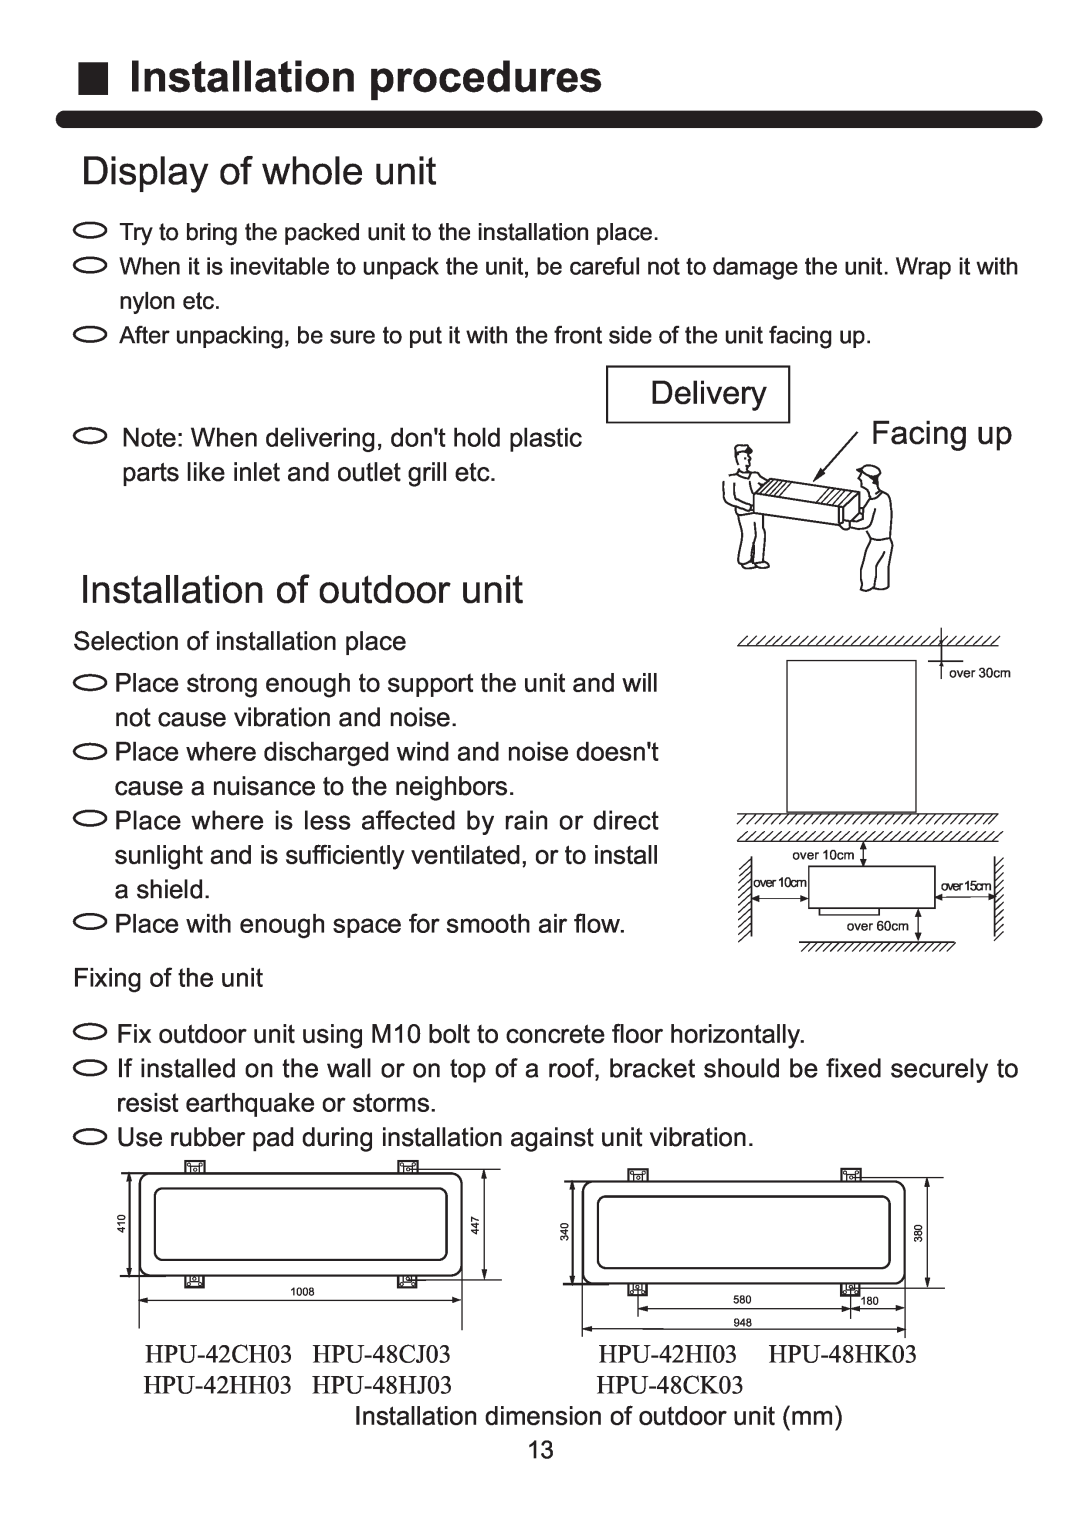 Haier HPU-42HI03 Installation procedures, Display of whole unit, Installation of outdoor unit, Delivery, Facing up 